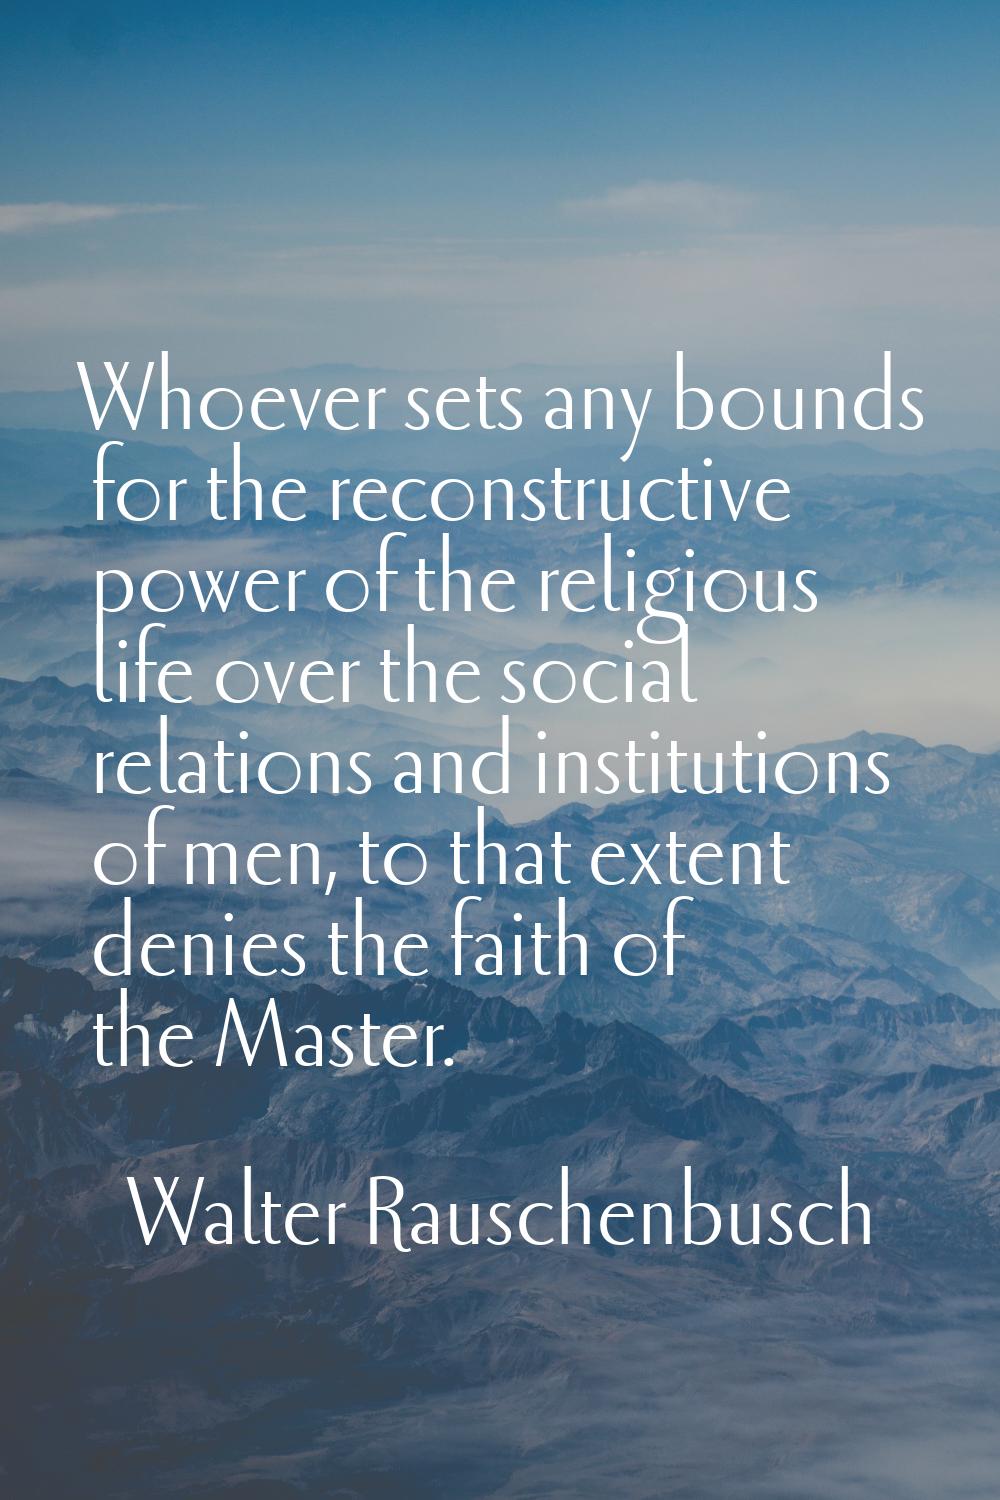 Whoever sets any bounds for the reconstructive power of the religious life over the social relation